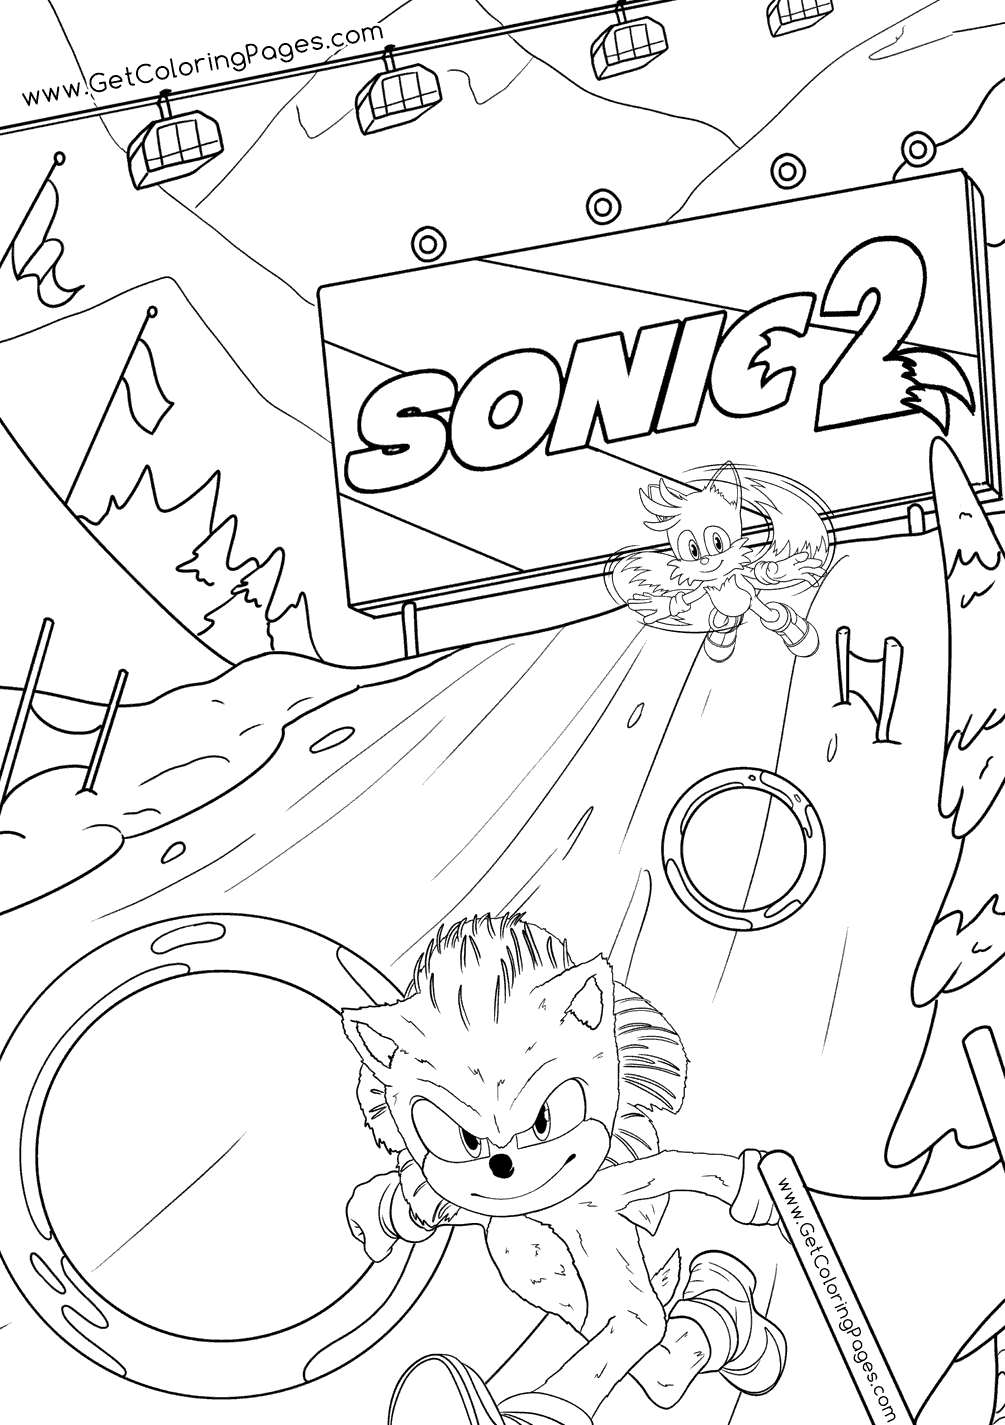 Sonic The Hedgehog 2 Movie Coloring Page